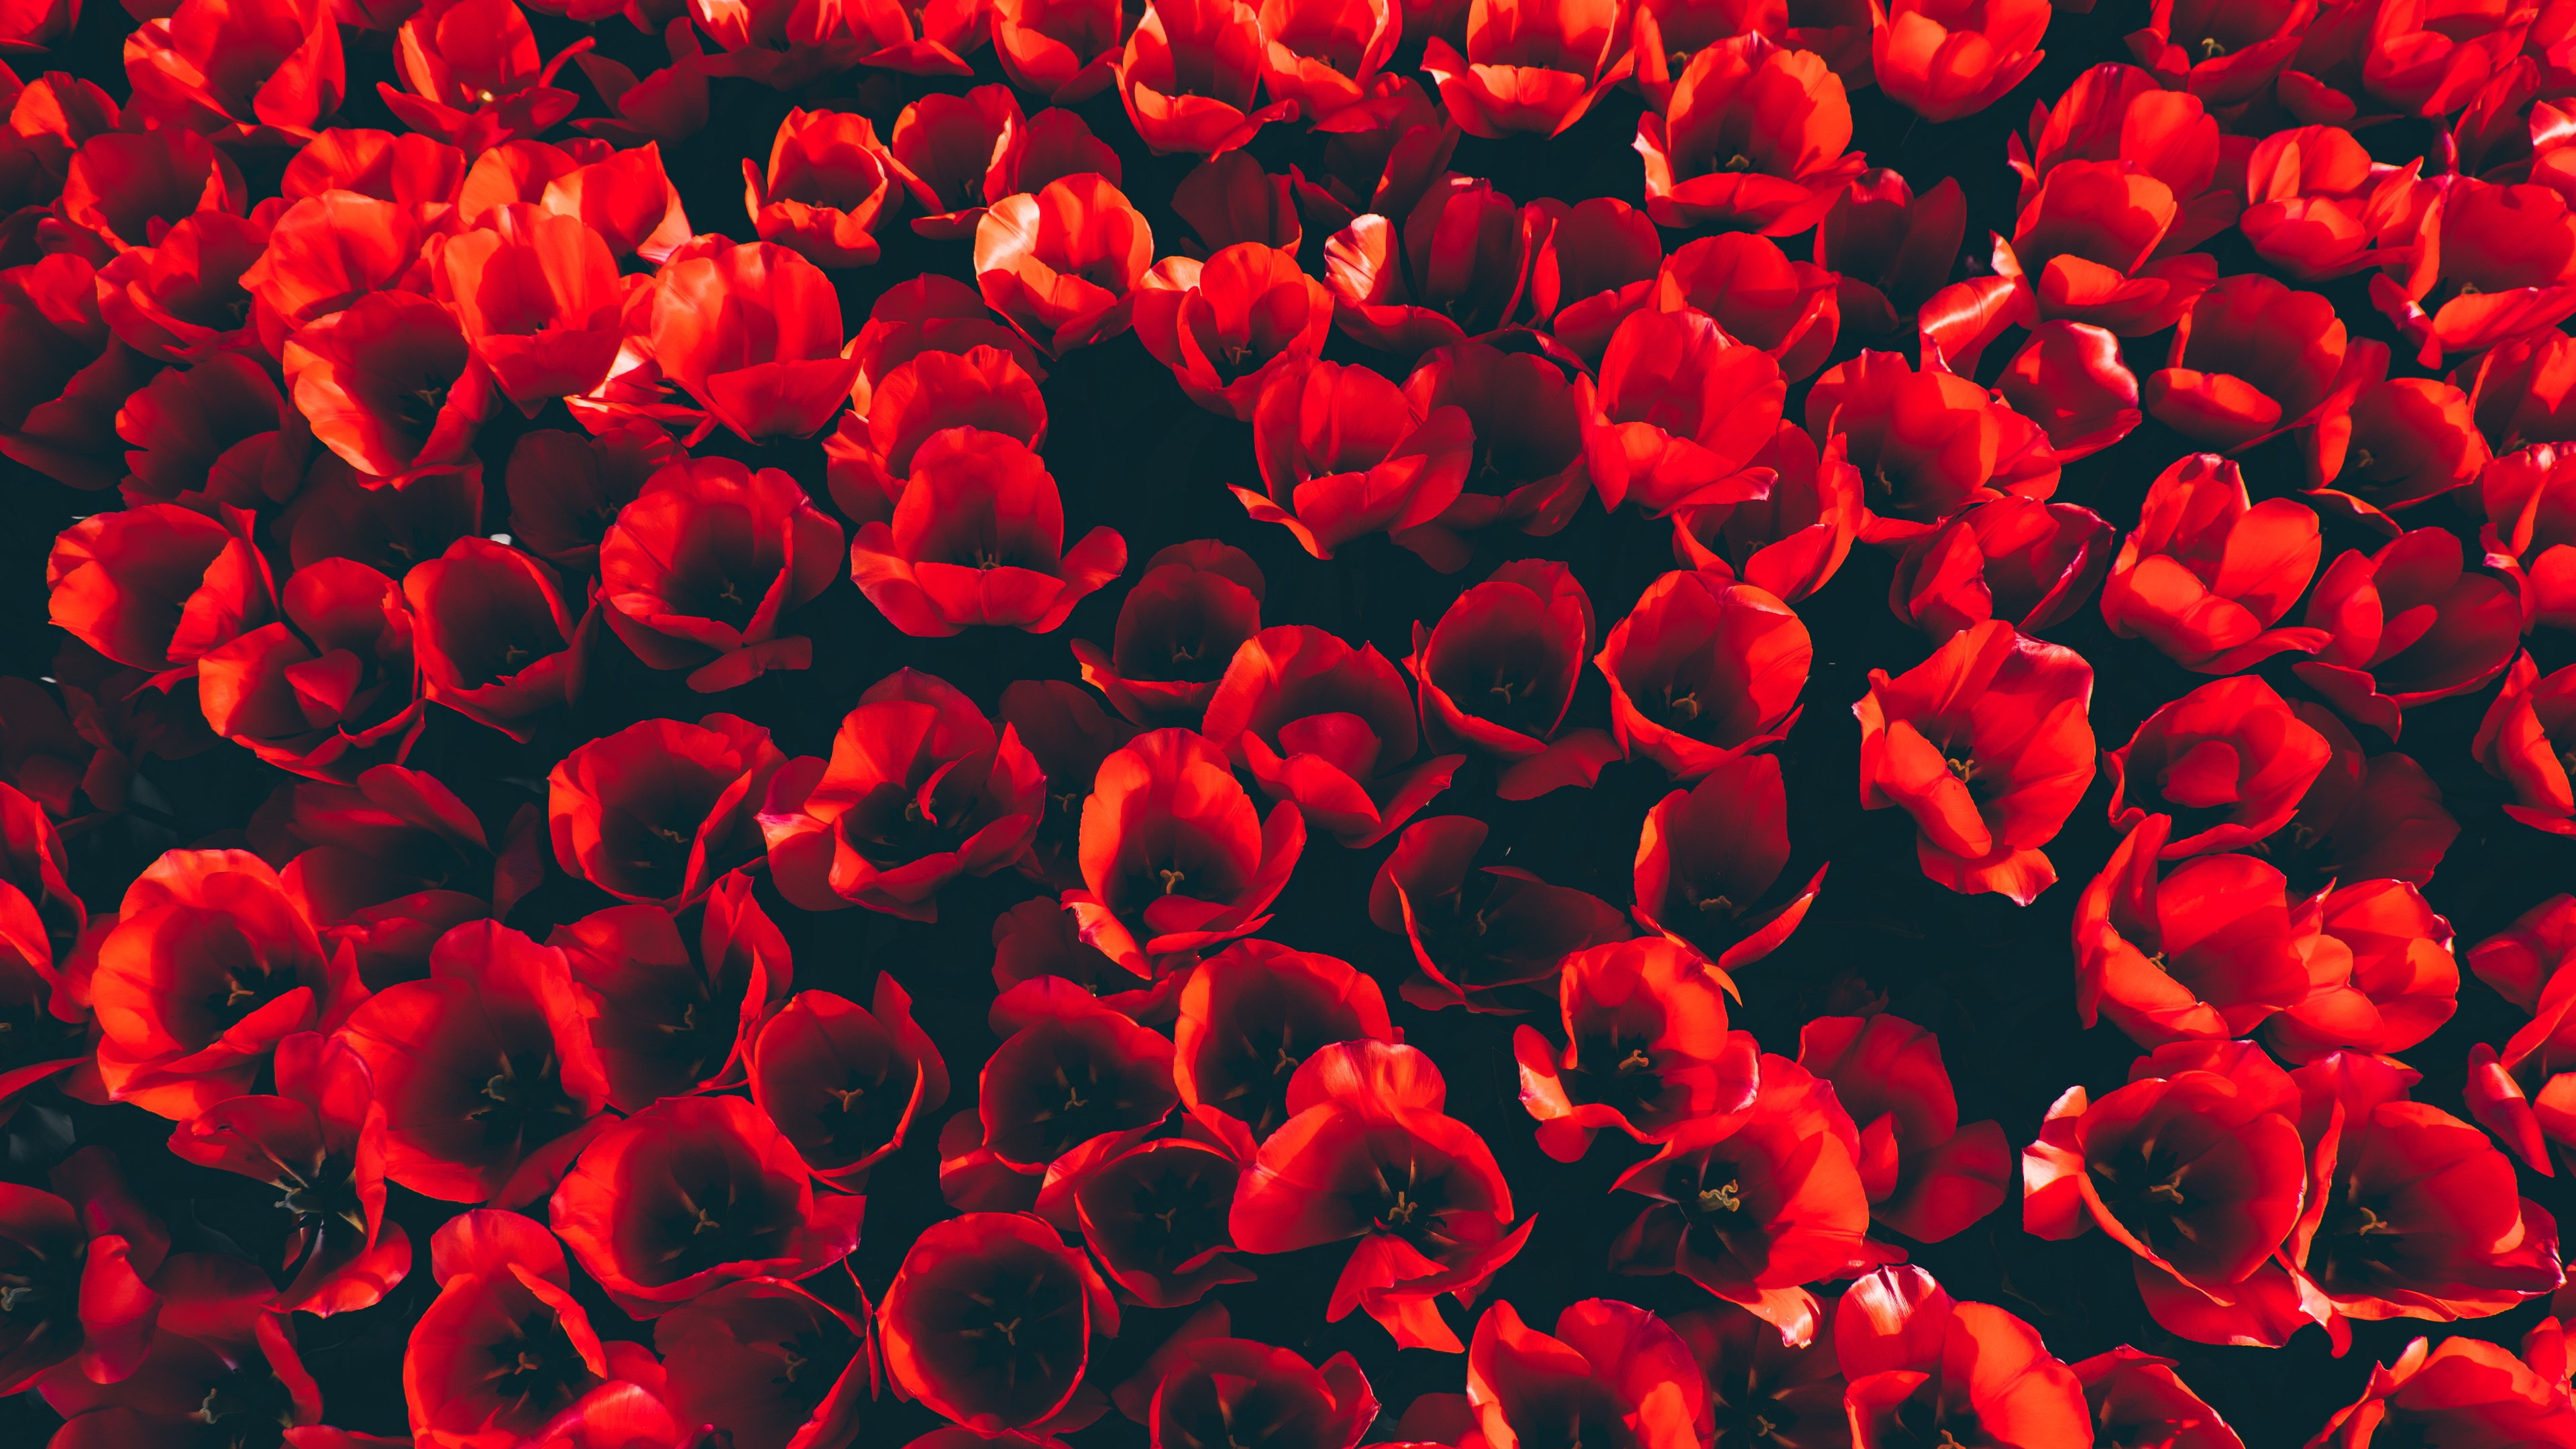 Red Flower Petals in Close up Photography. Wallpaper in 3840x2160 Resolution